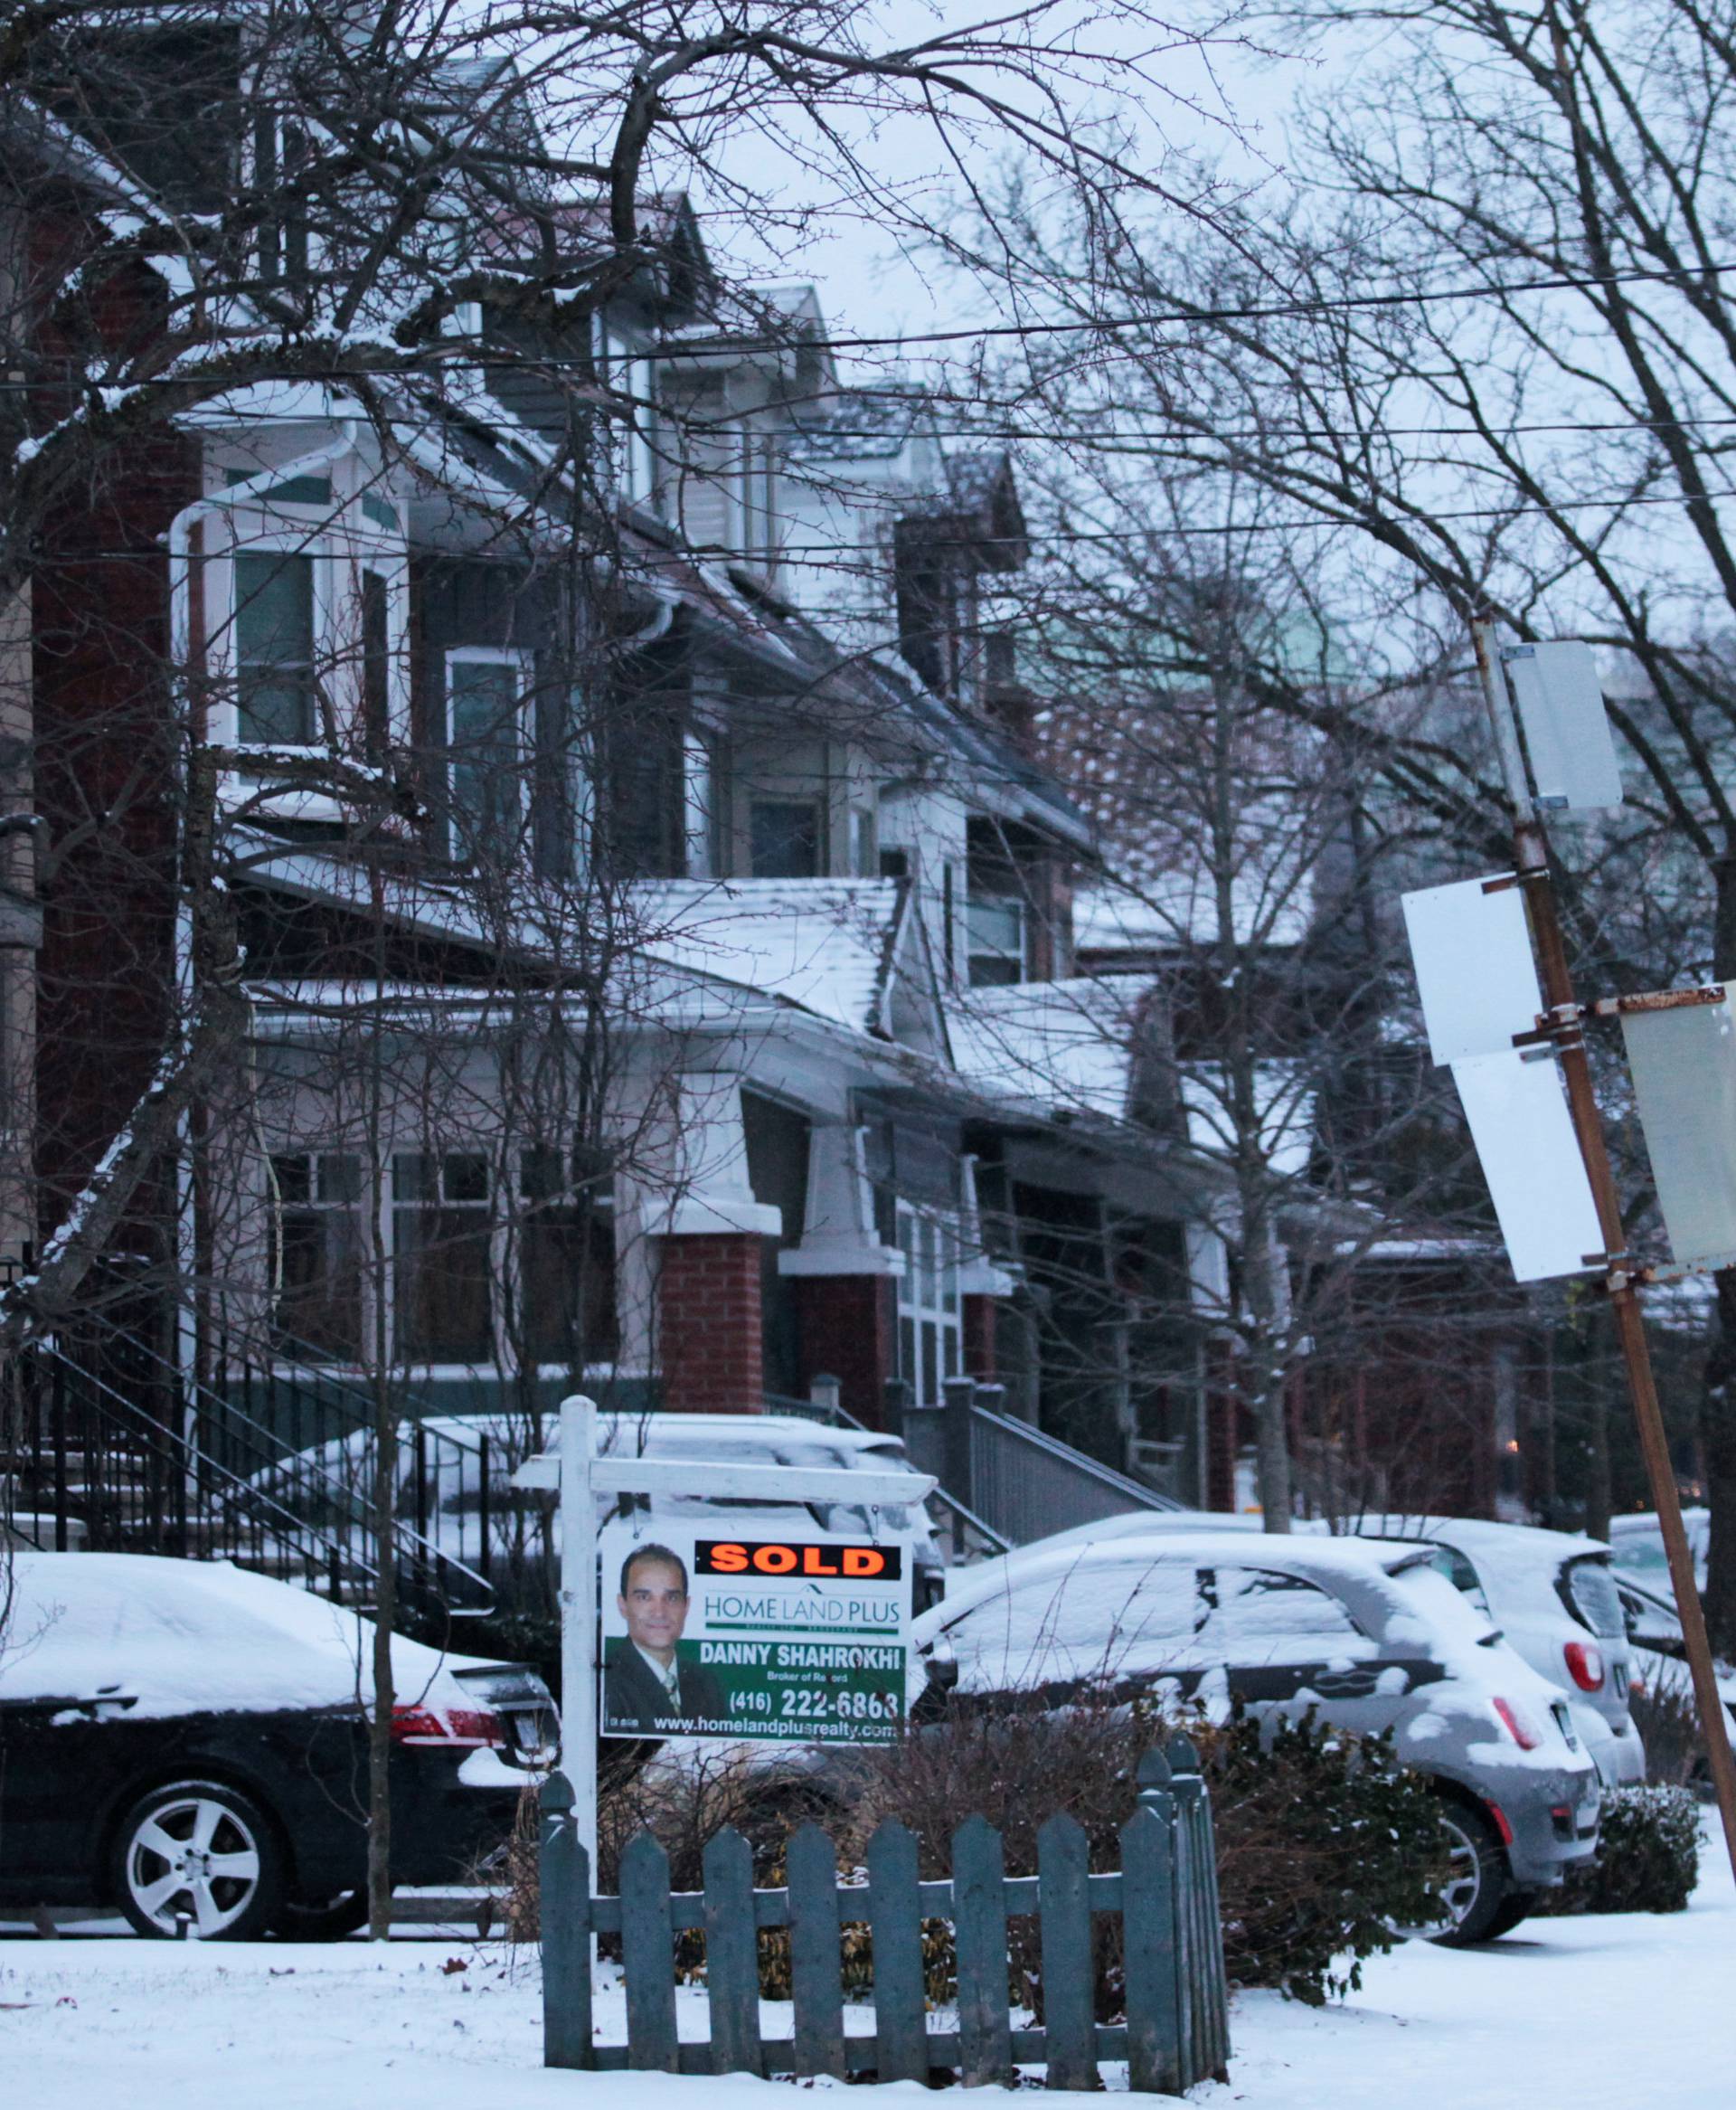 House sold sign is seen after an overnight snow storm, in Toronto